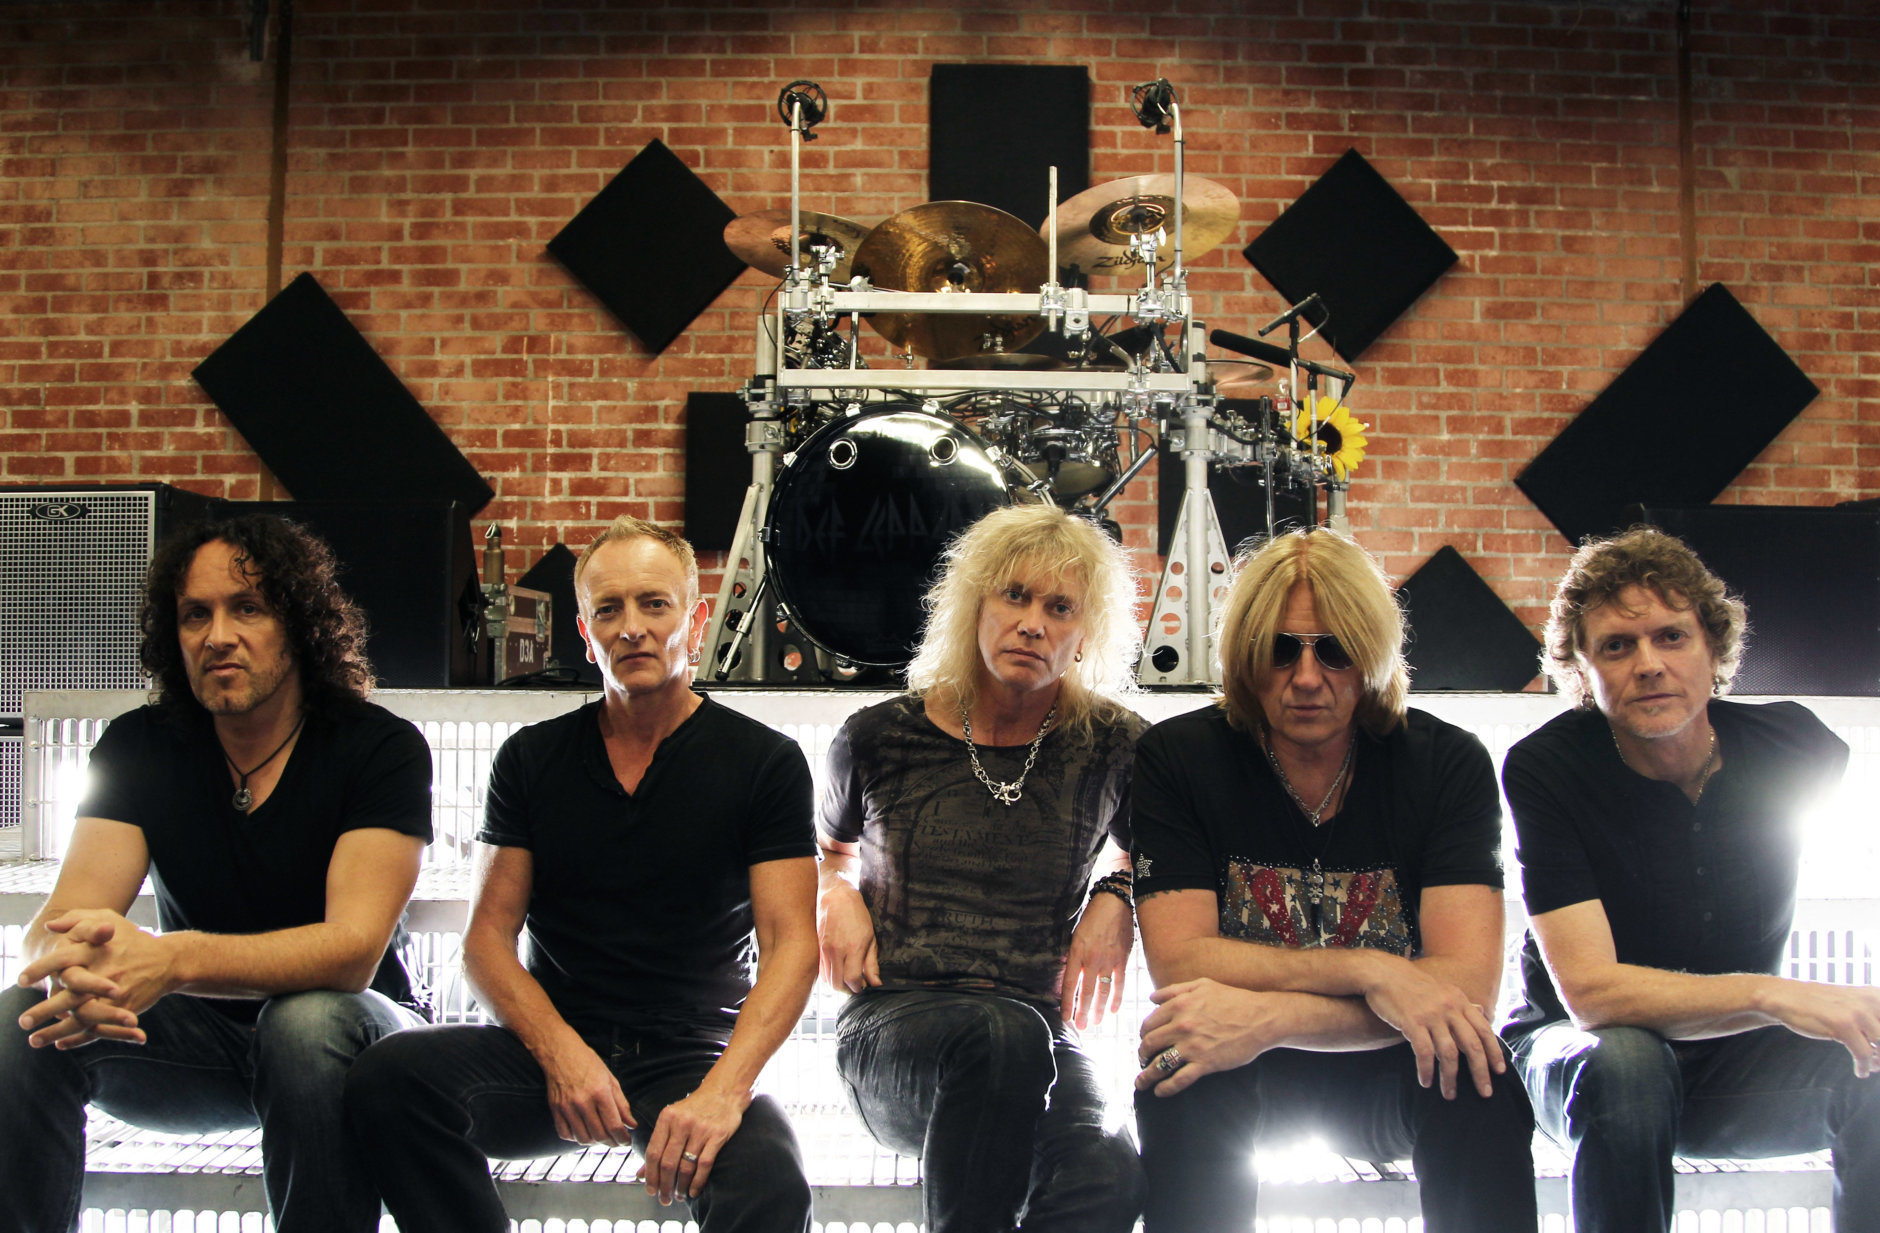 From left, Vivian Campbell, Phil Collen, Rick Savage, Joe Elliott, and Rick Allen, of musical group Def Leppard, pose for a portrait on Thursday, May 31, 2012 in Los Angeles. (Photo by Matt Sayles/Invision/AP)